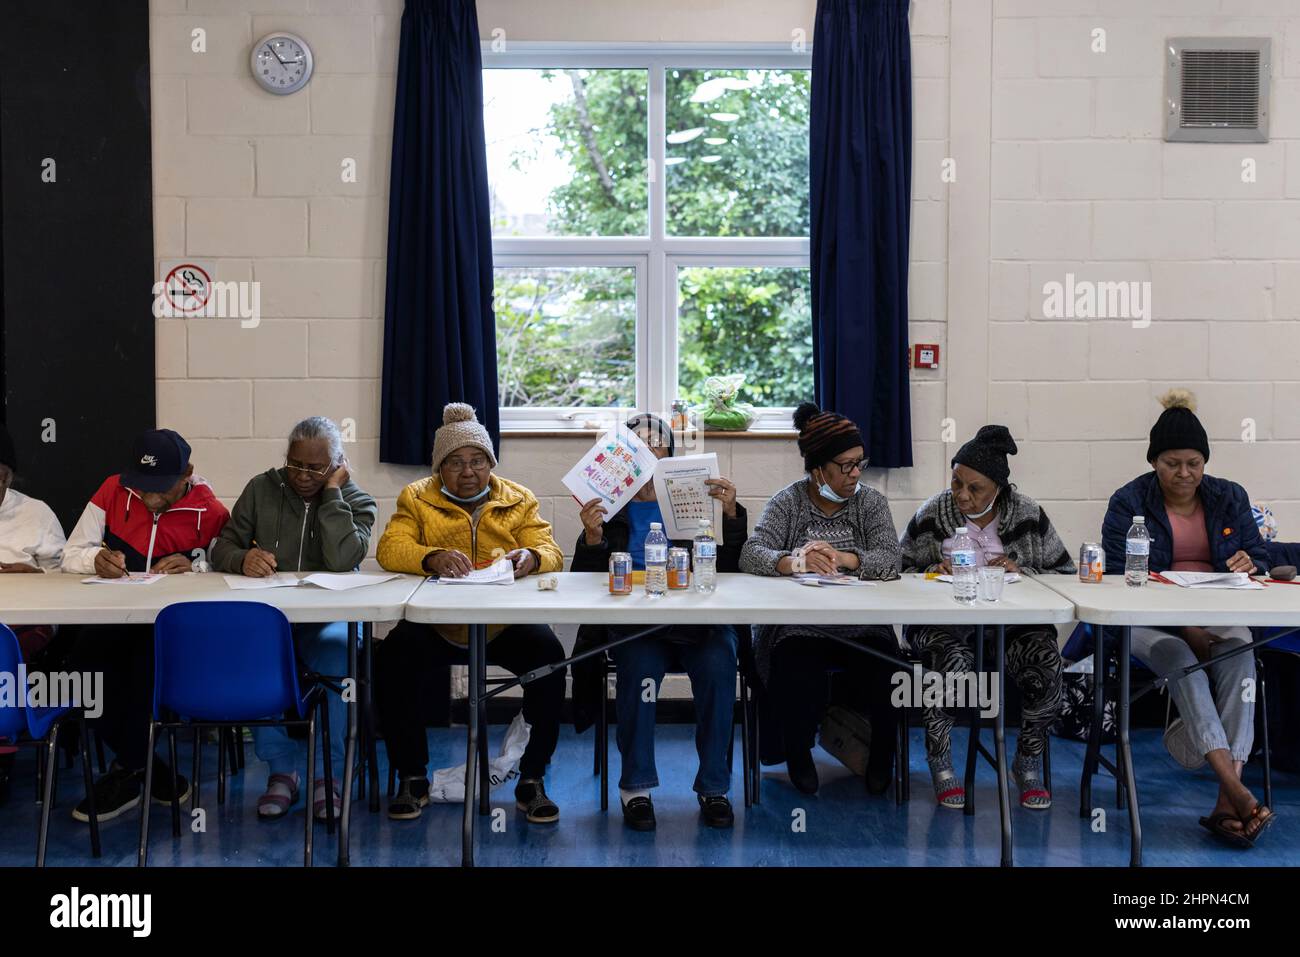 Exiles from Chagos Islands inside Broadfield Community Centre, together they gather in the community hall in Sussex to reminisce about home. Stock Photo